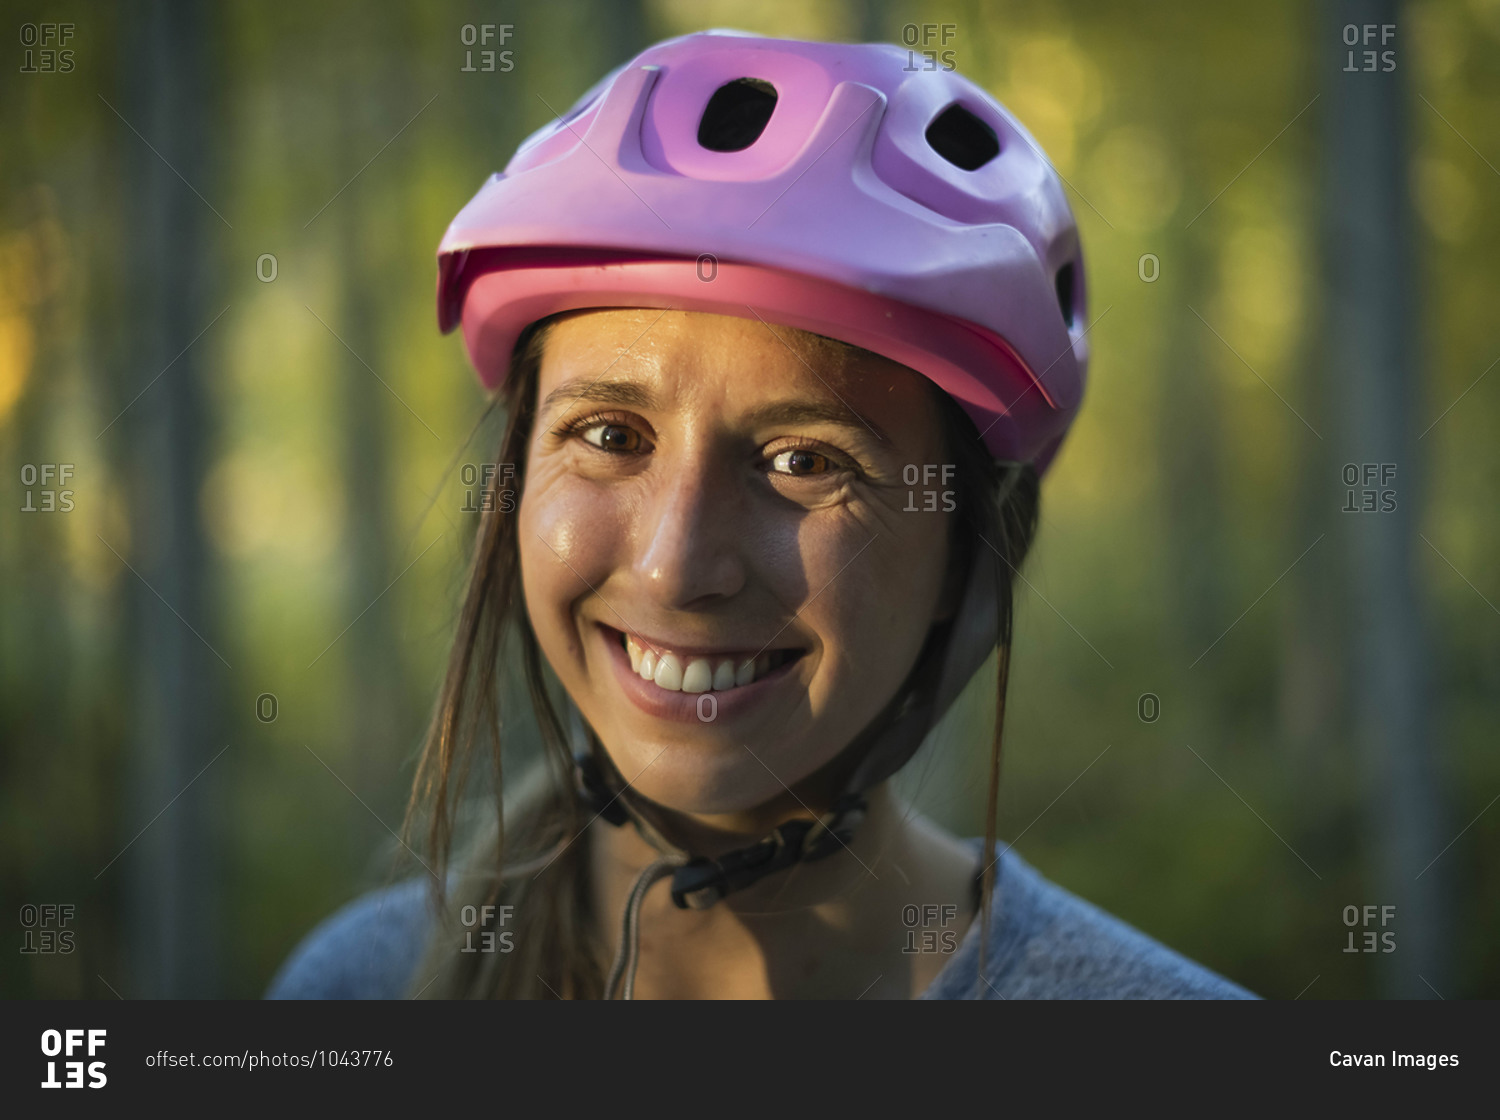 Close-up portrait of smiling young woman wearing cycling helmet